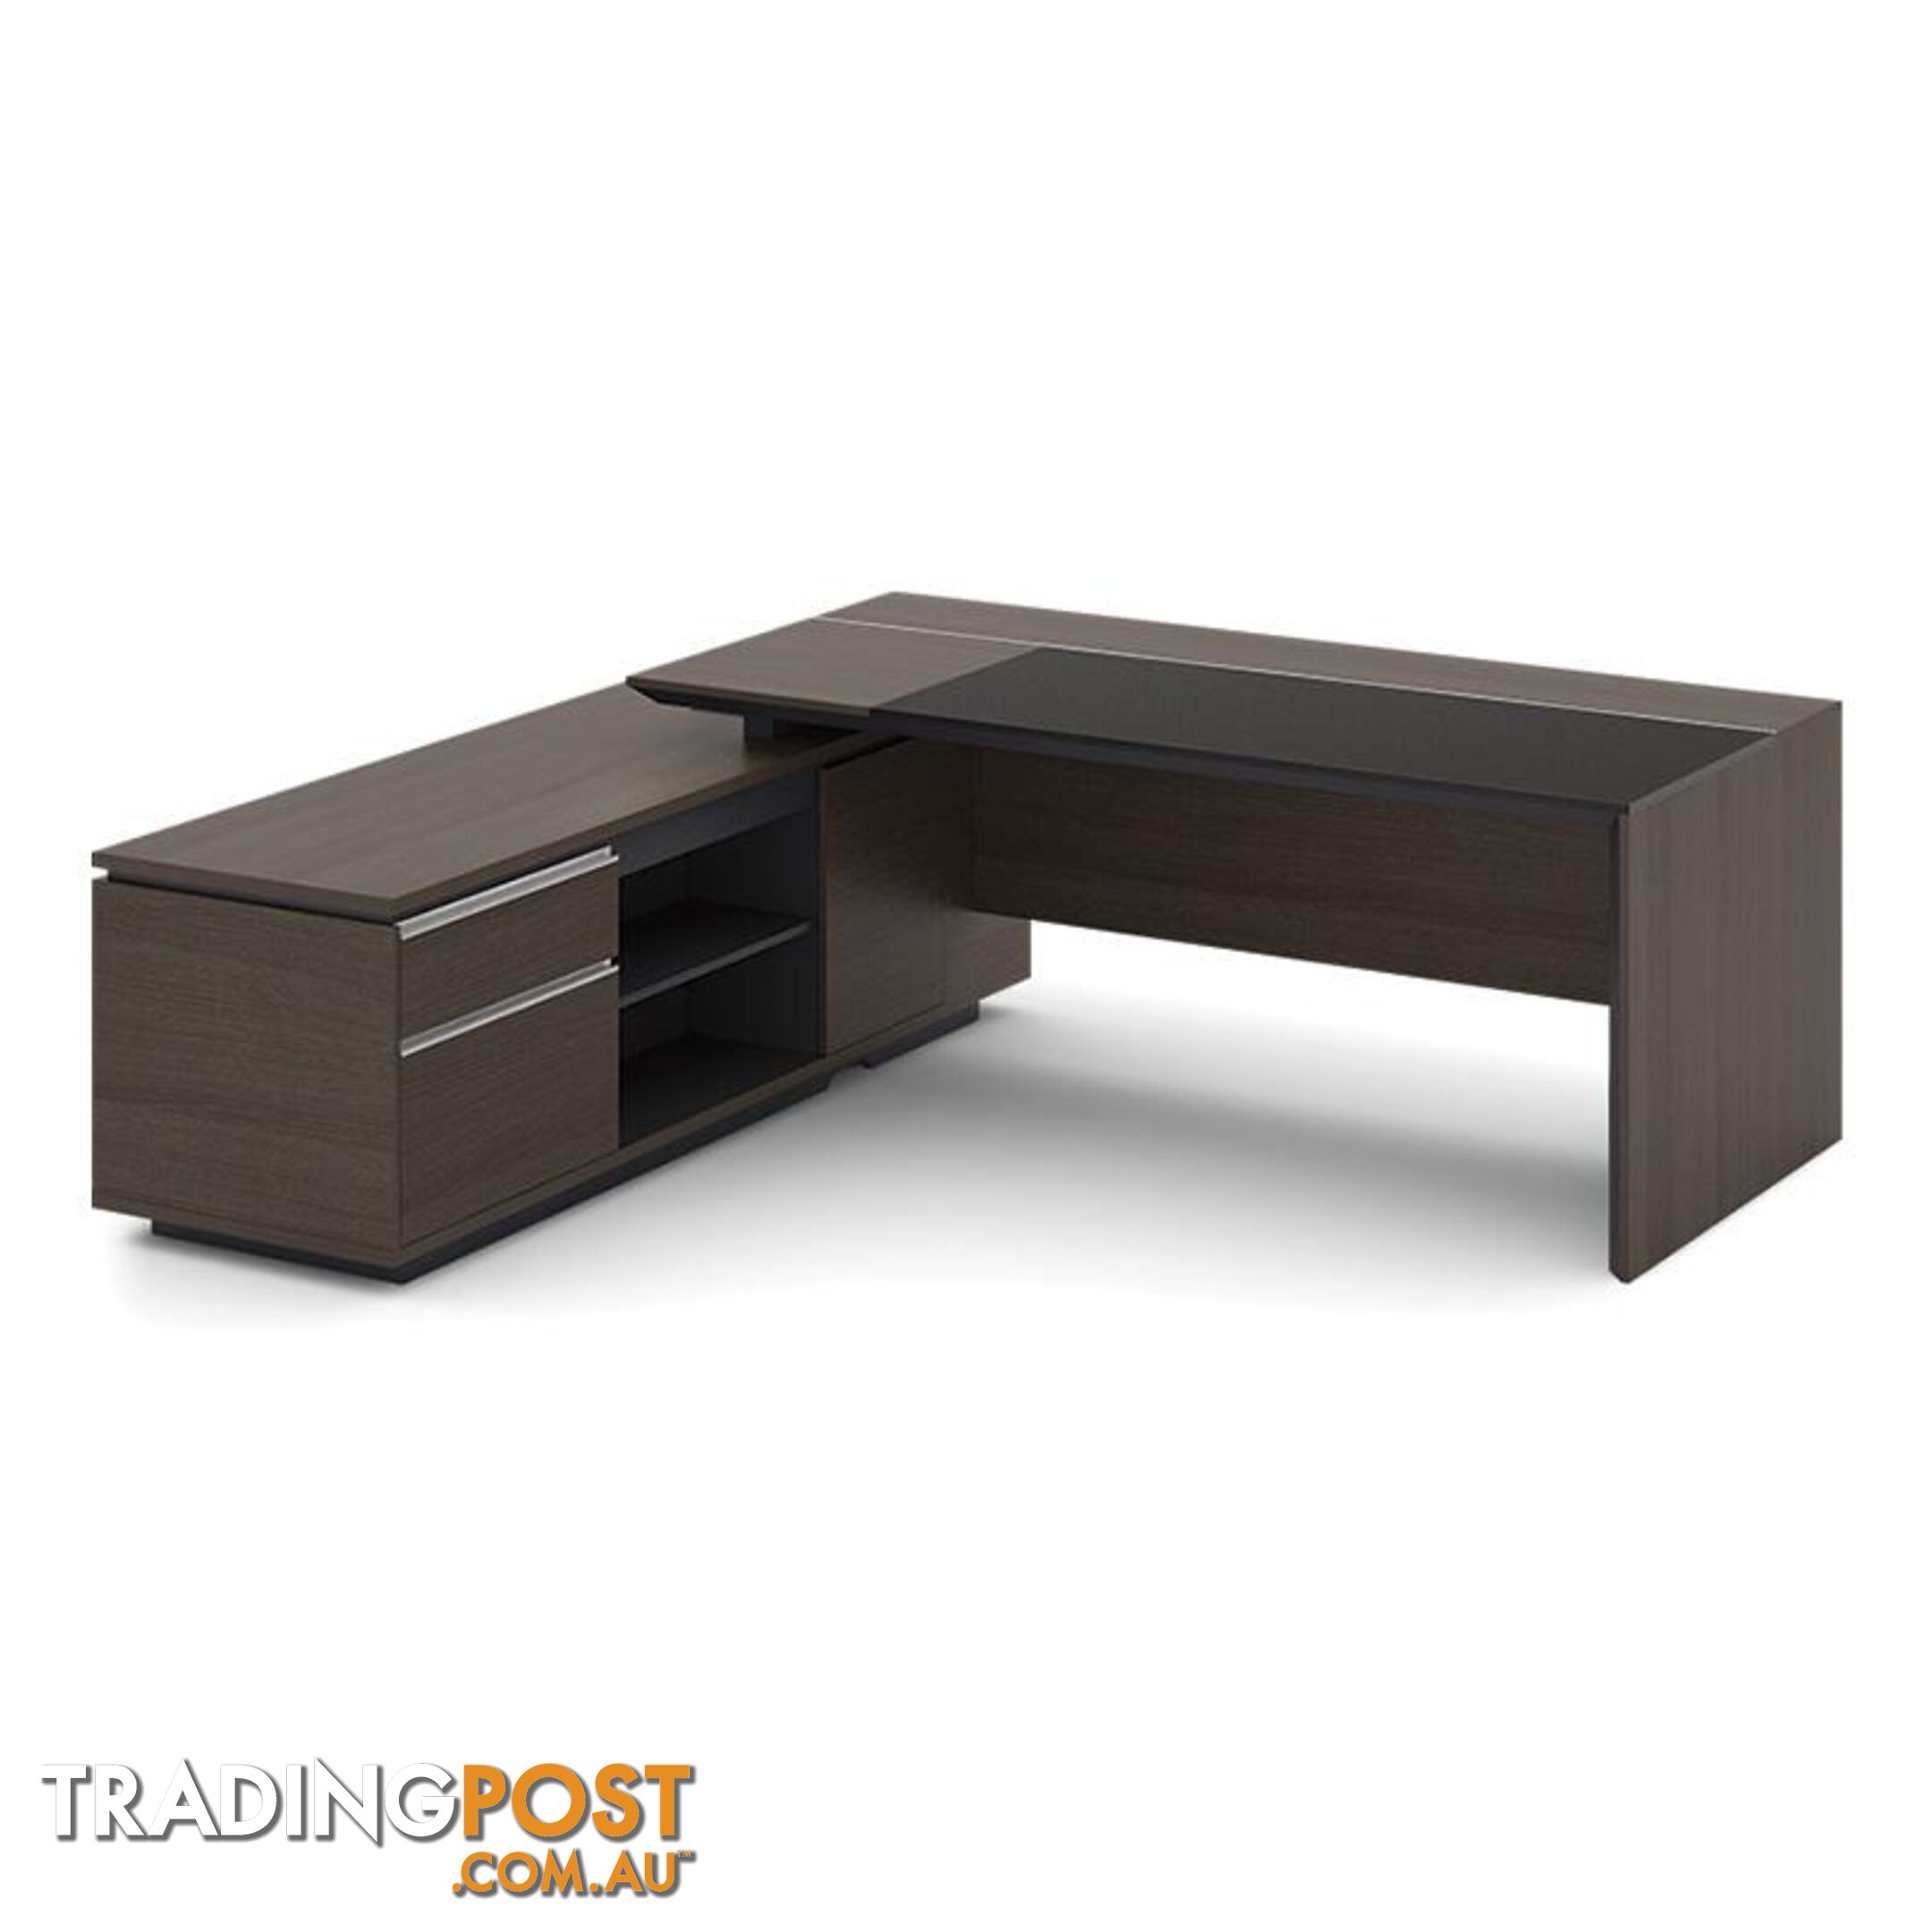 Carter Executive Office Desk with Left Return 2.2M - Coffee & Charcoal - MF-22MKD163 - 9334719001296